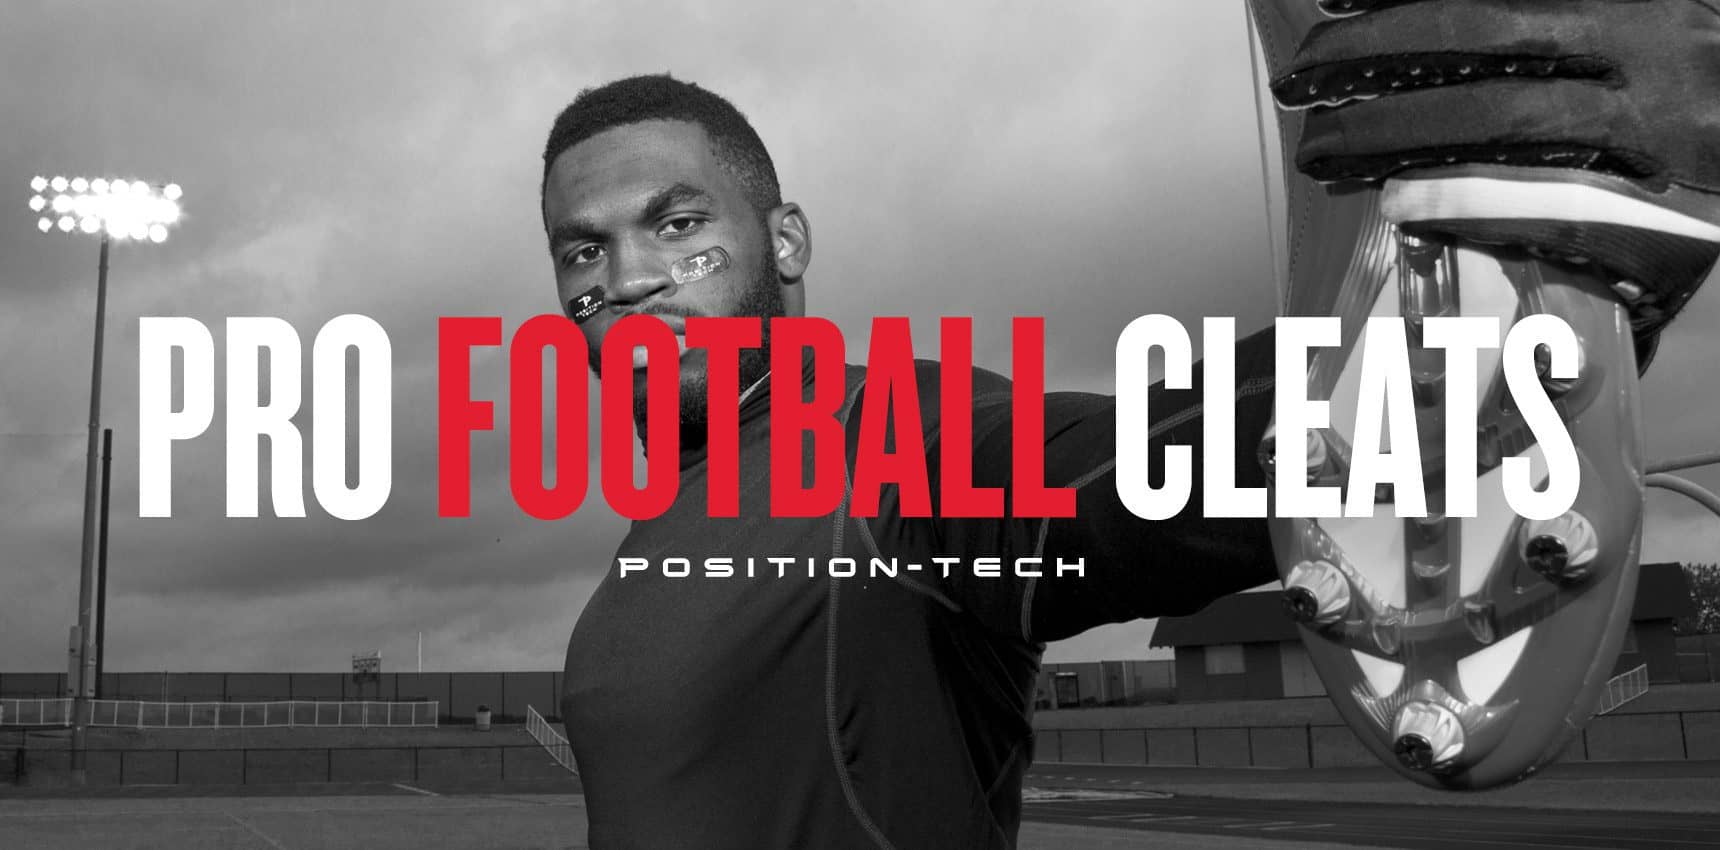 Position-Tech promotional banner of professional athlete displaying football cleat